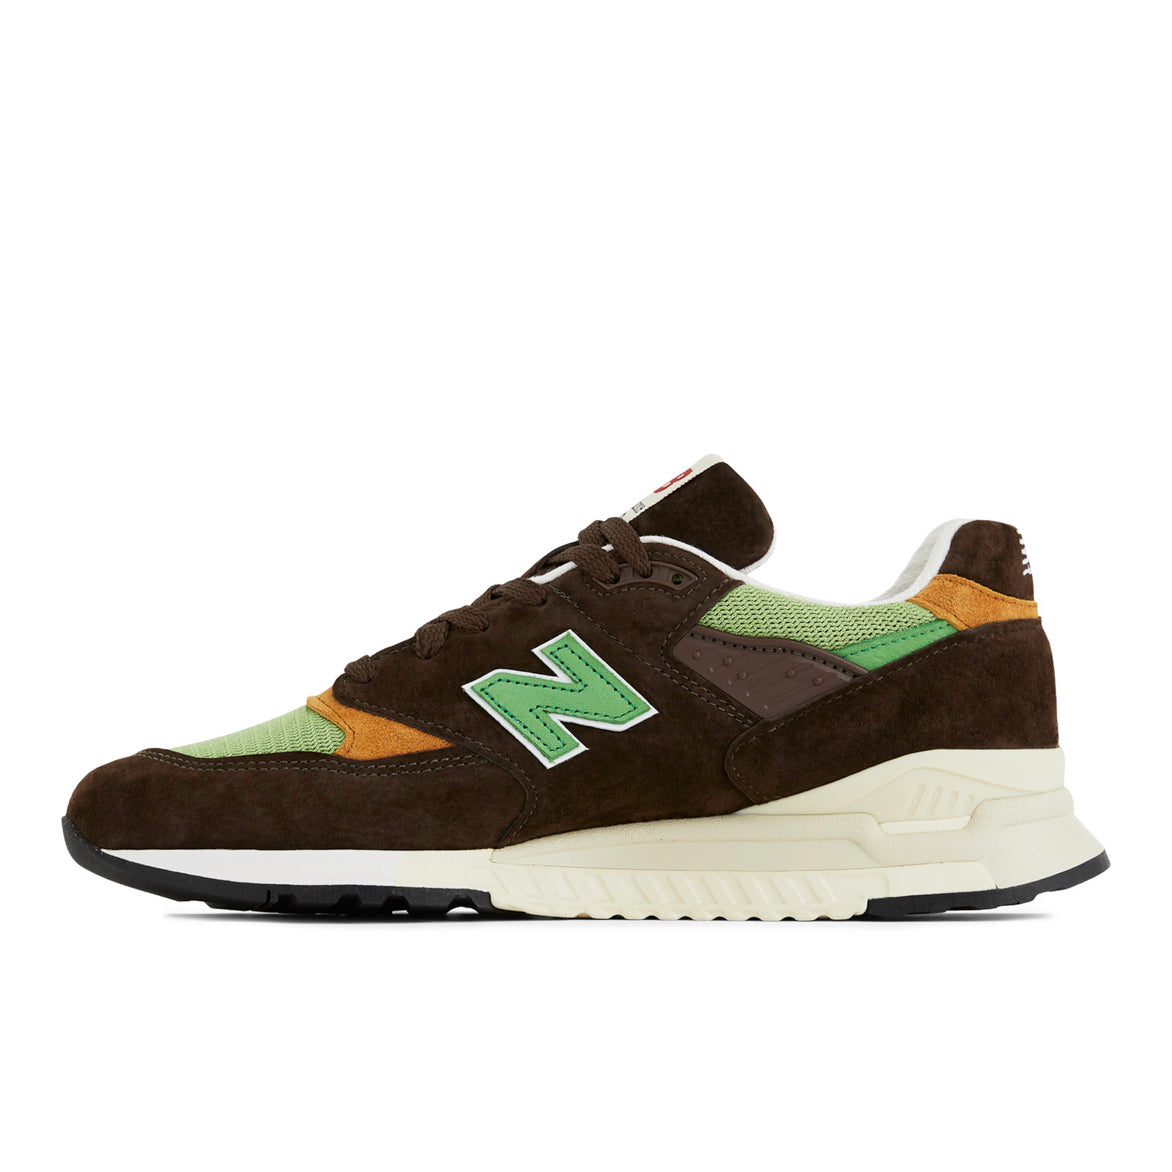 MADE IN USA 998 "BROWN / GREEN"